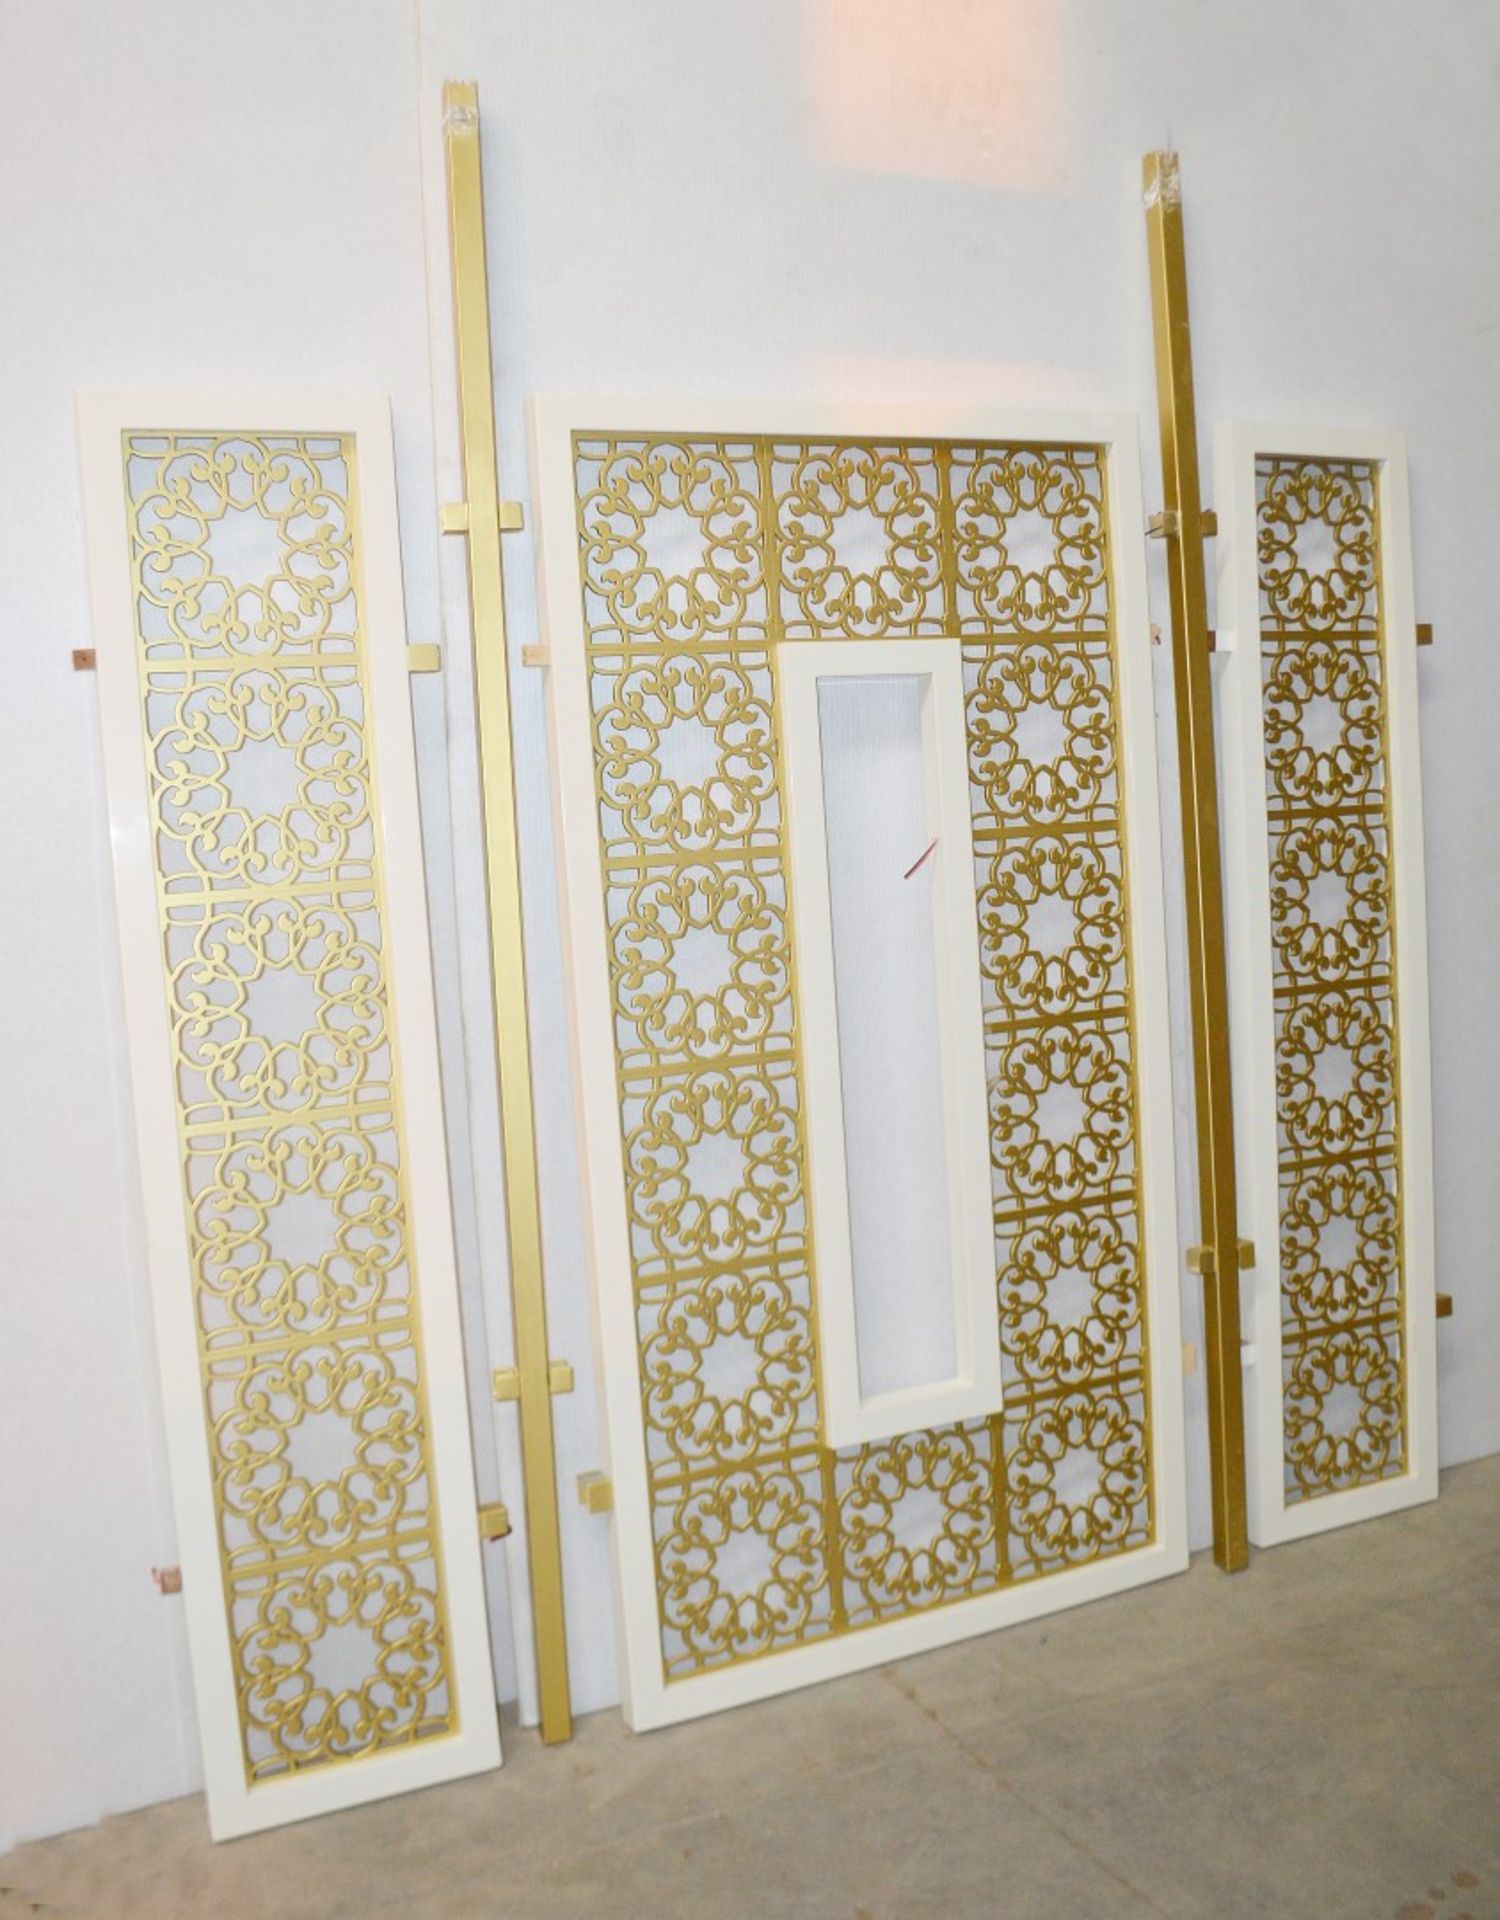 A Set Of 3 x Moroccan-style Room Divider Screen Panels With Pendant Light - Ref: HMS108 - CL668 - - Image 5 of 10